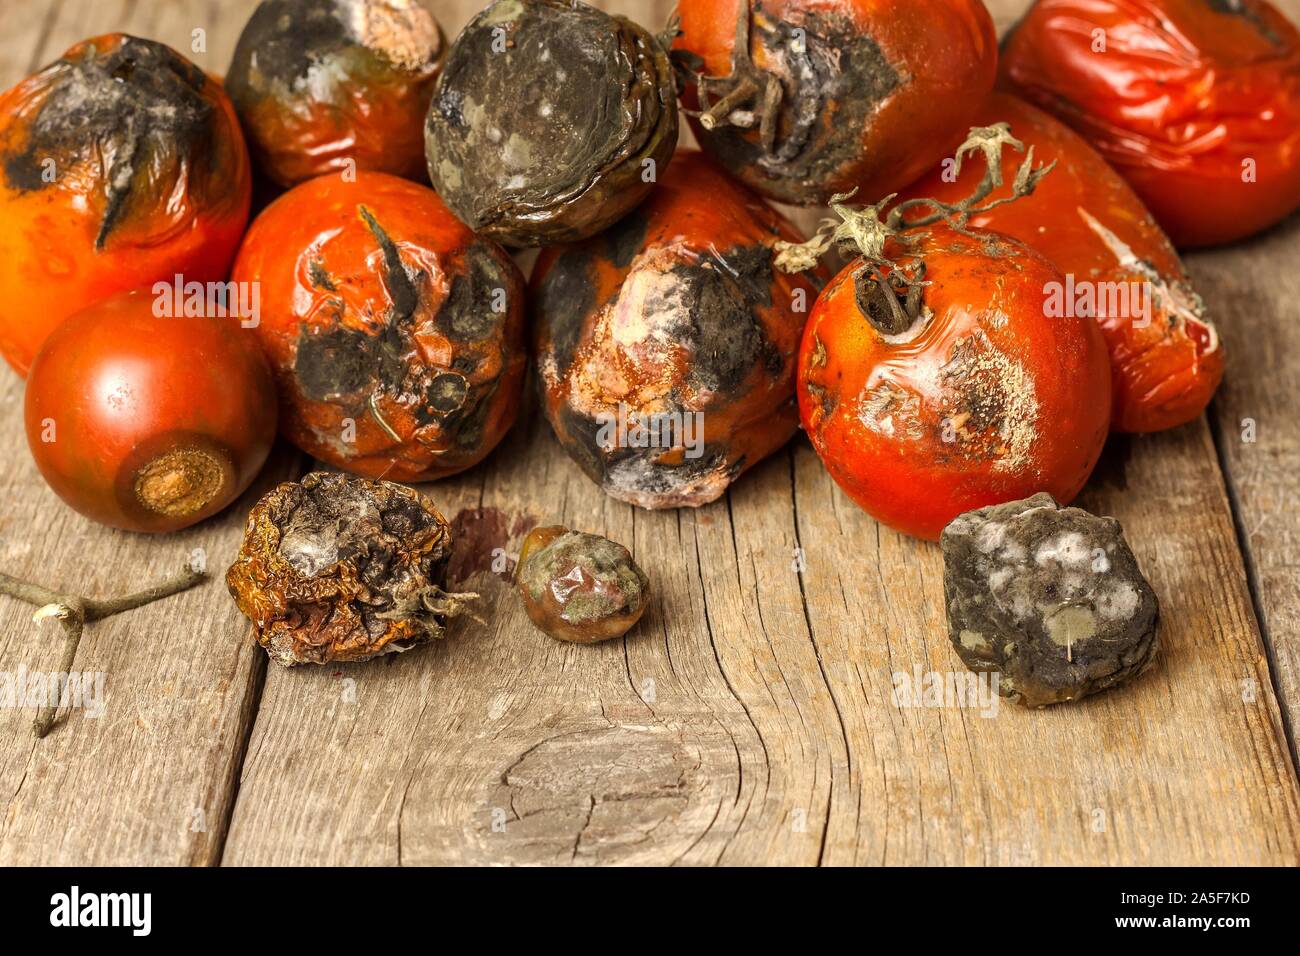 Rotten tomato. Mold on vegetables. Rotten product. Spoiled food